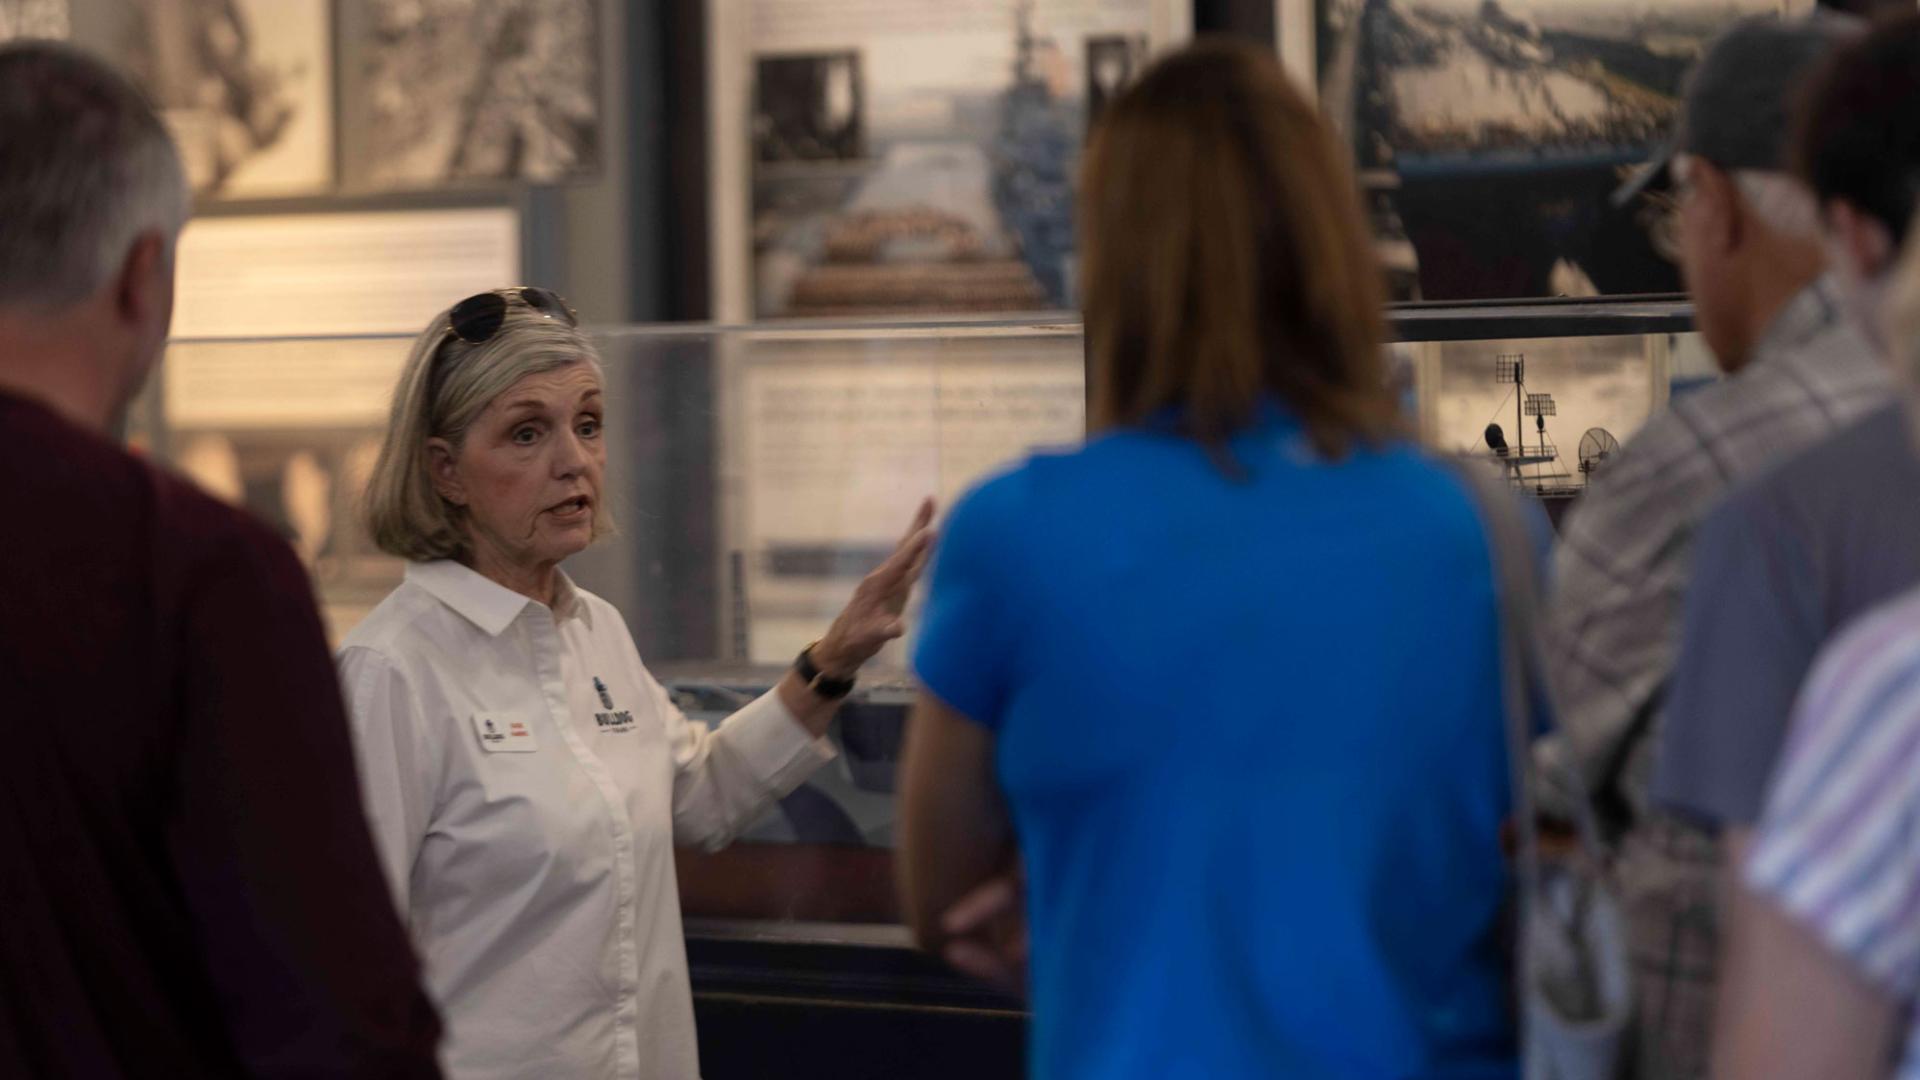 image of a woman giving a tour in an aviation museum